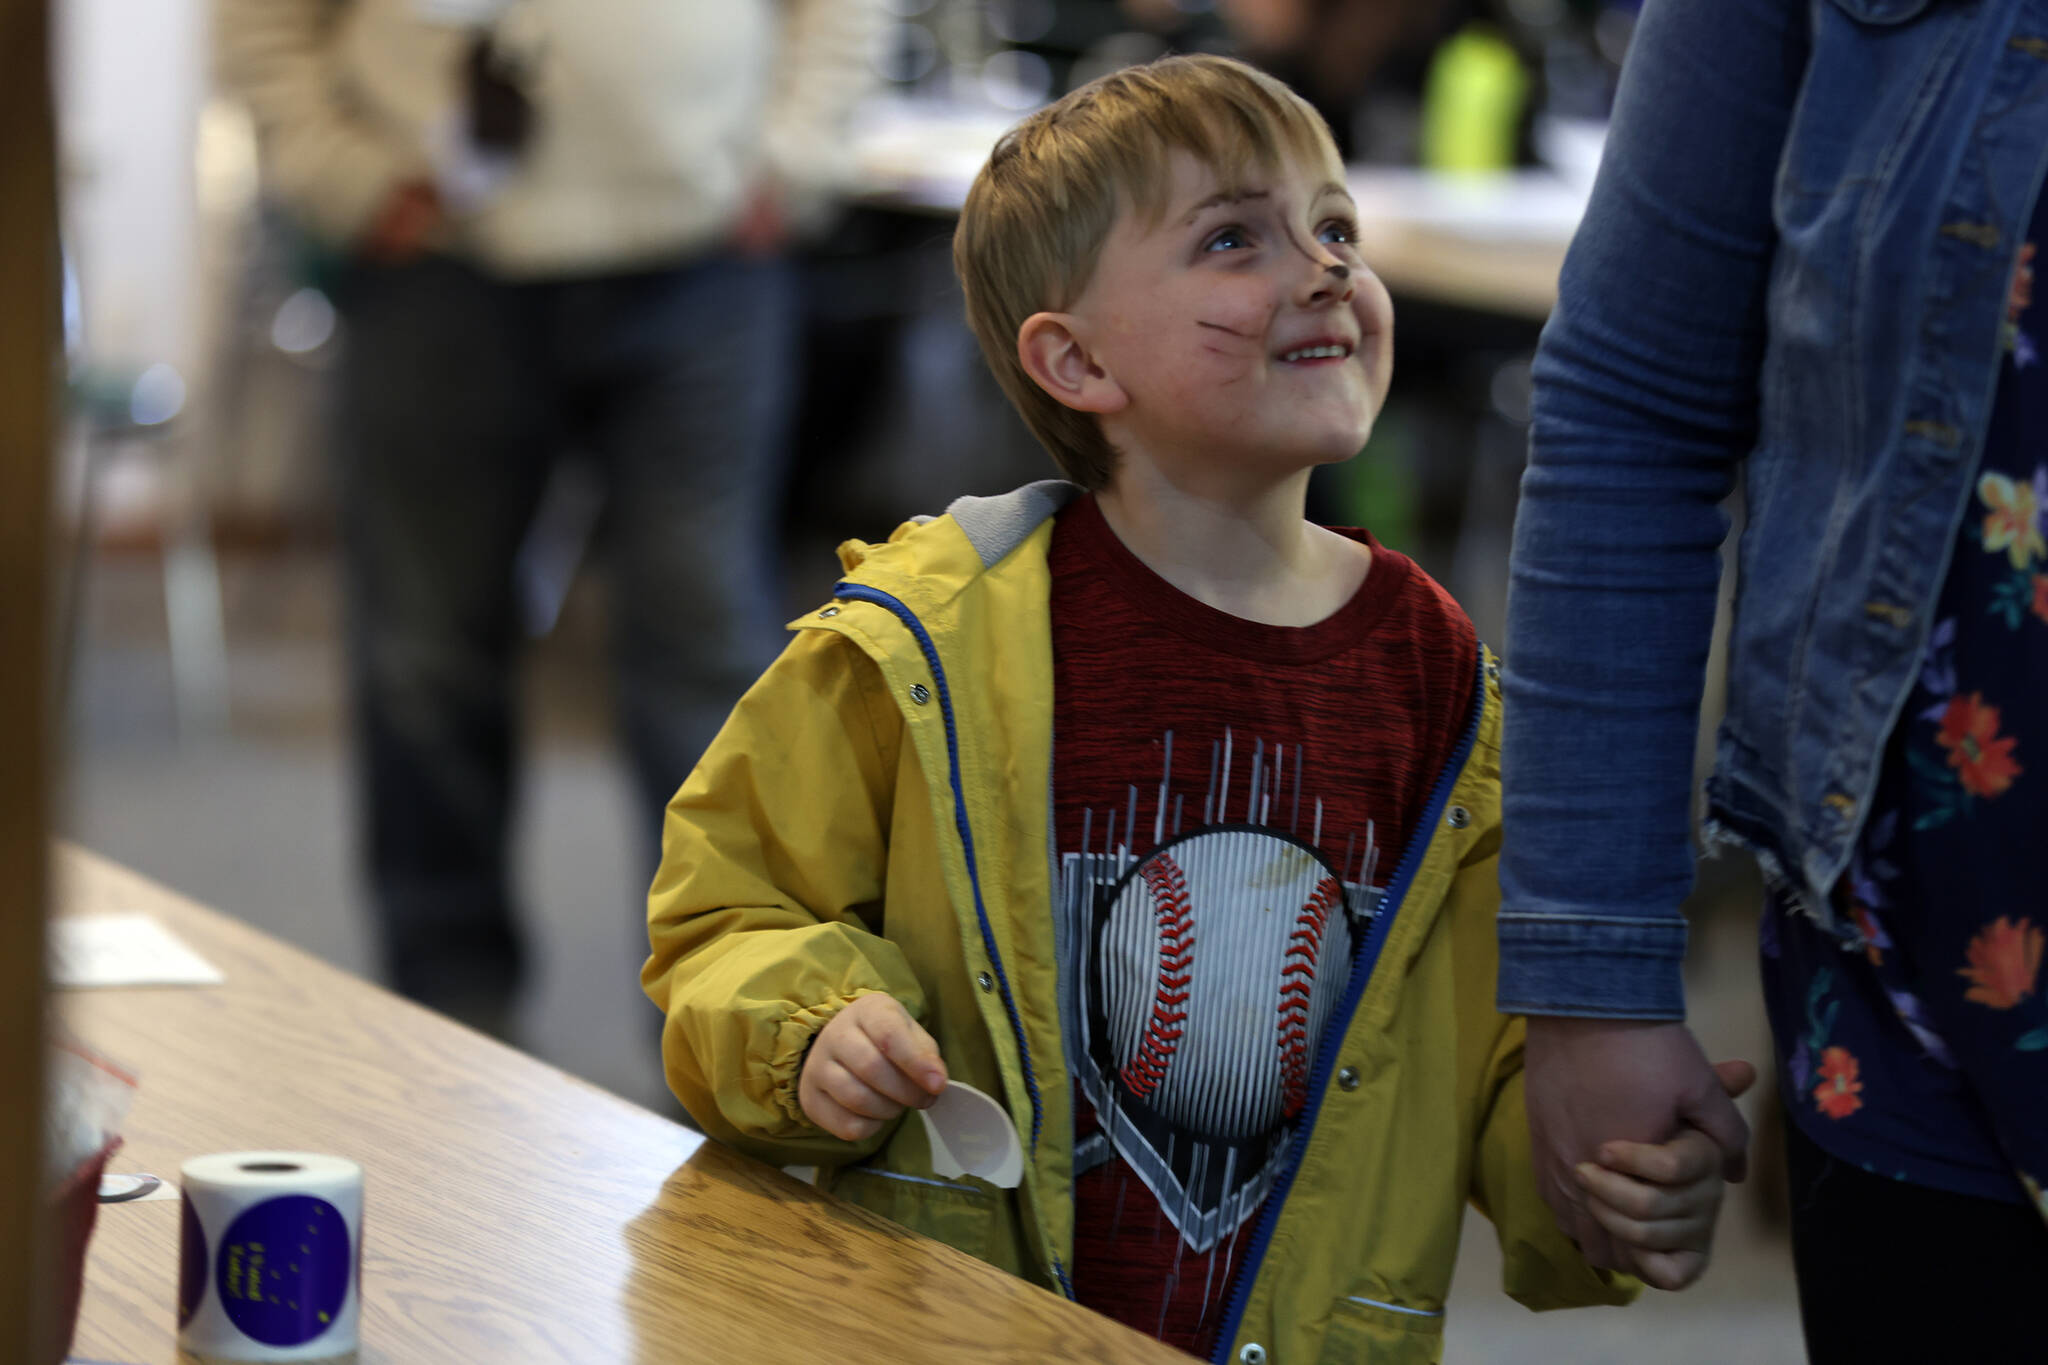 Rook Anderson, 5, beams after collecting an “I Voted” sticker at Shepherd of the Valley Lutheran Church on Tuesday evening. (Ben Hohenstatt / Juneau Empire)